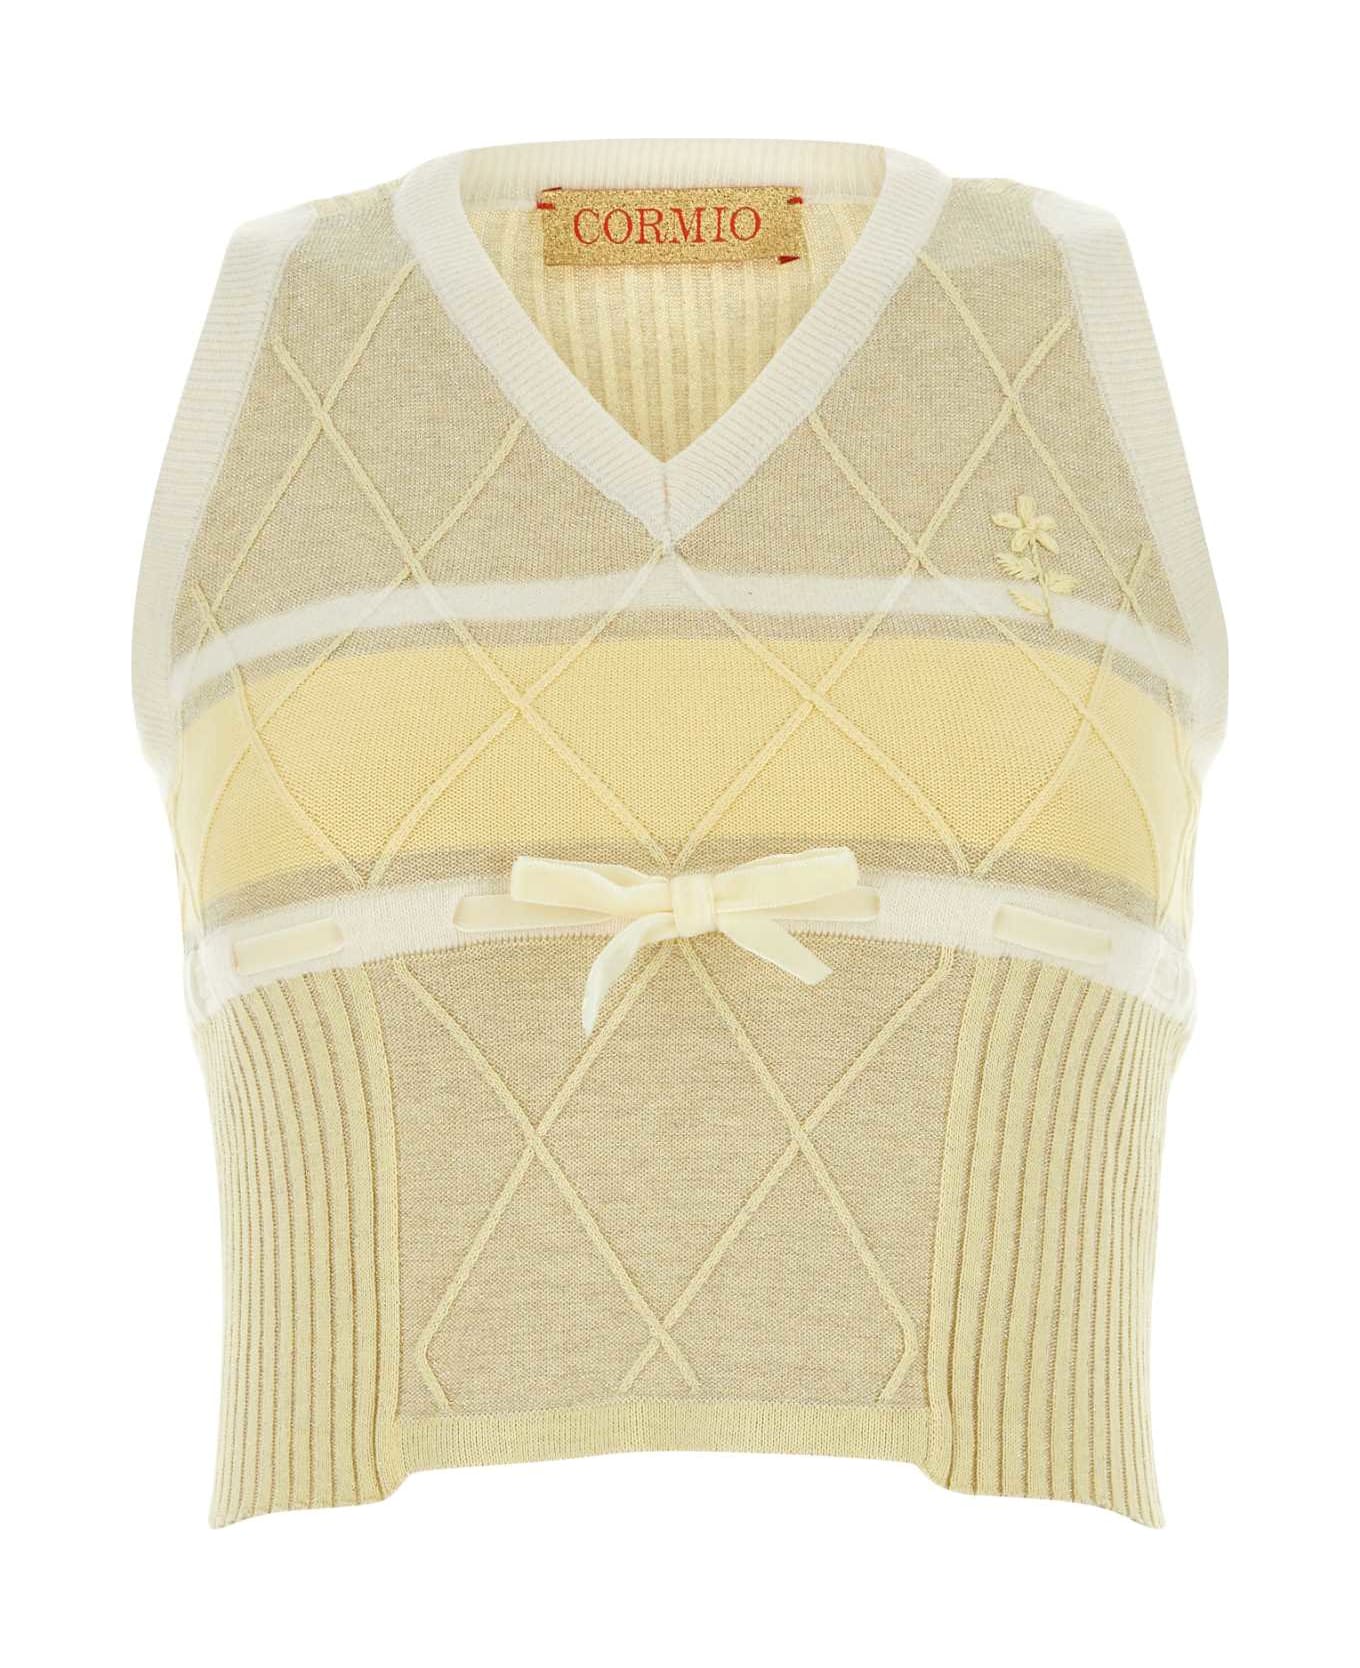 Cormio Embroidered Wool Blend Mary Vest - SABBIA